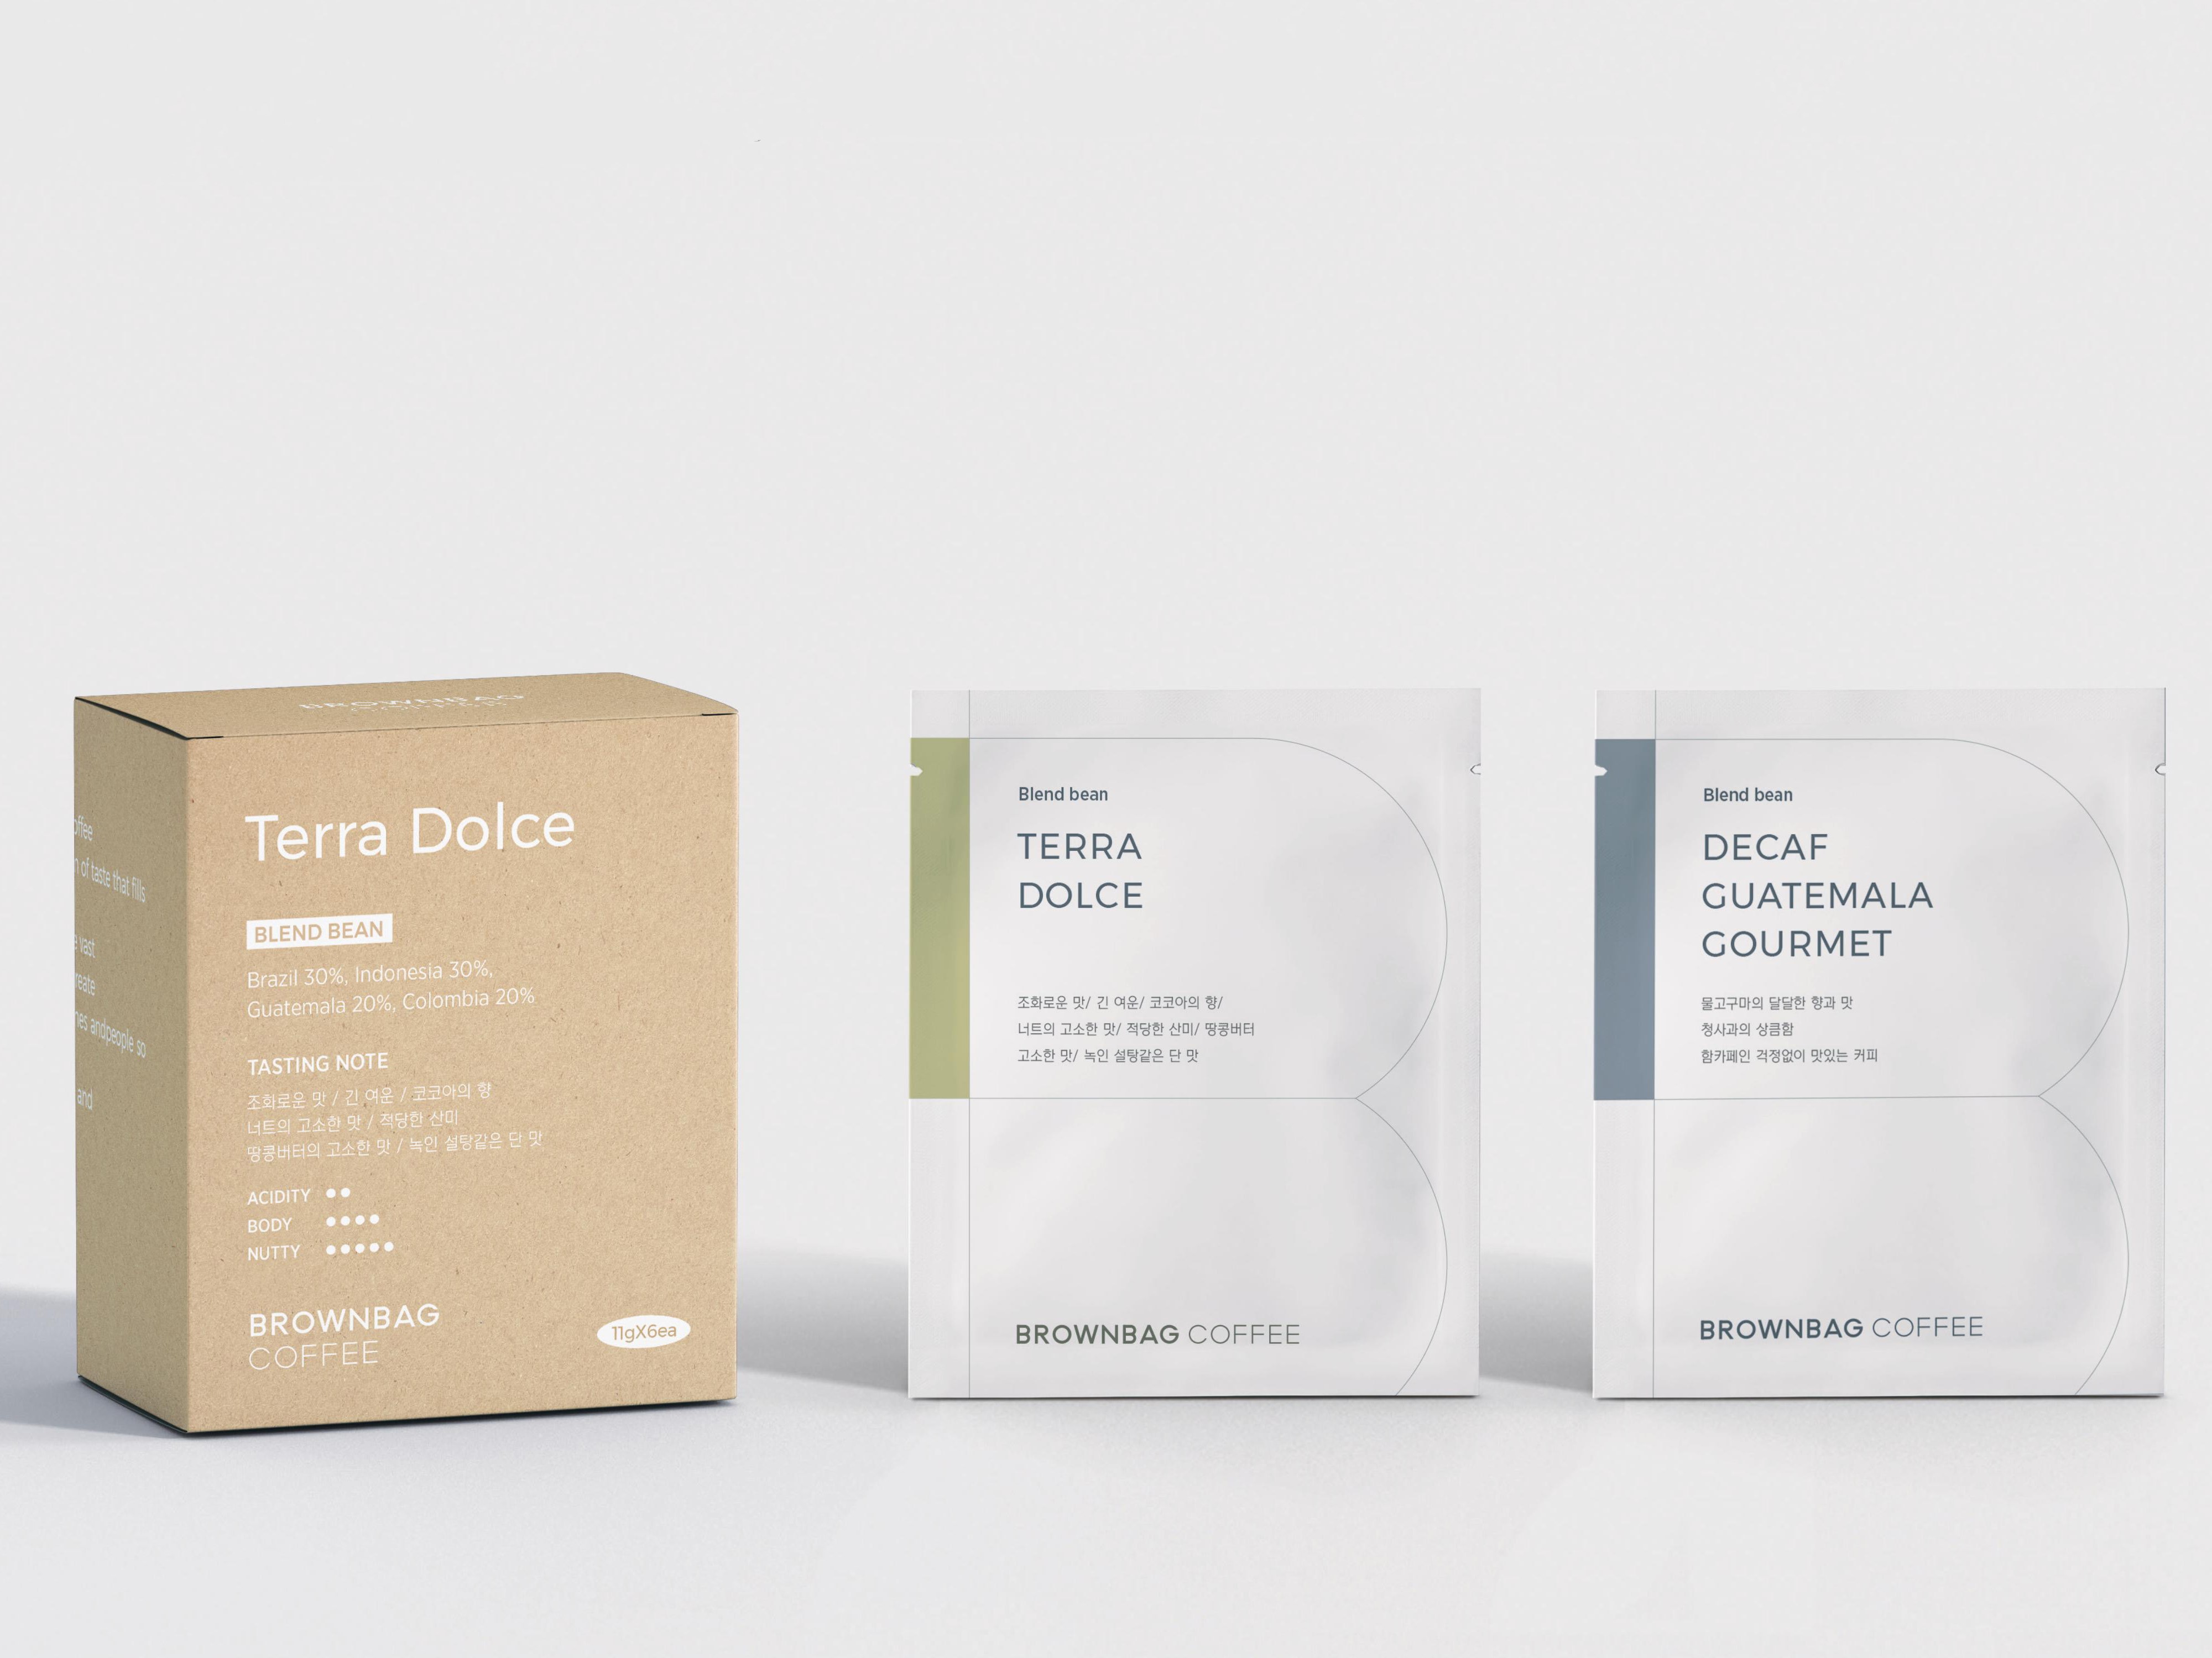 Brown bag coffee and drip bag with Seoul scent released